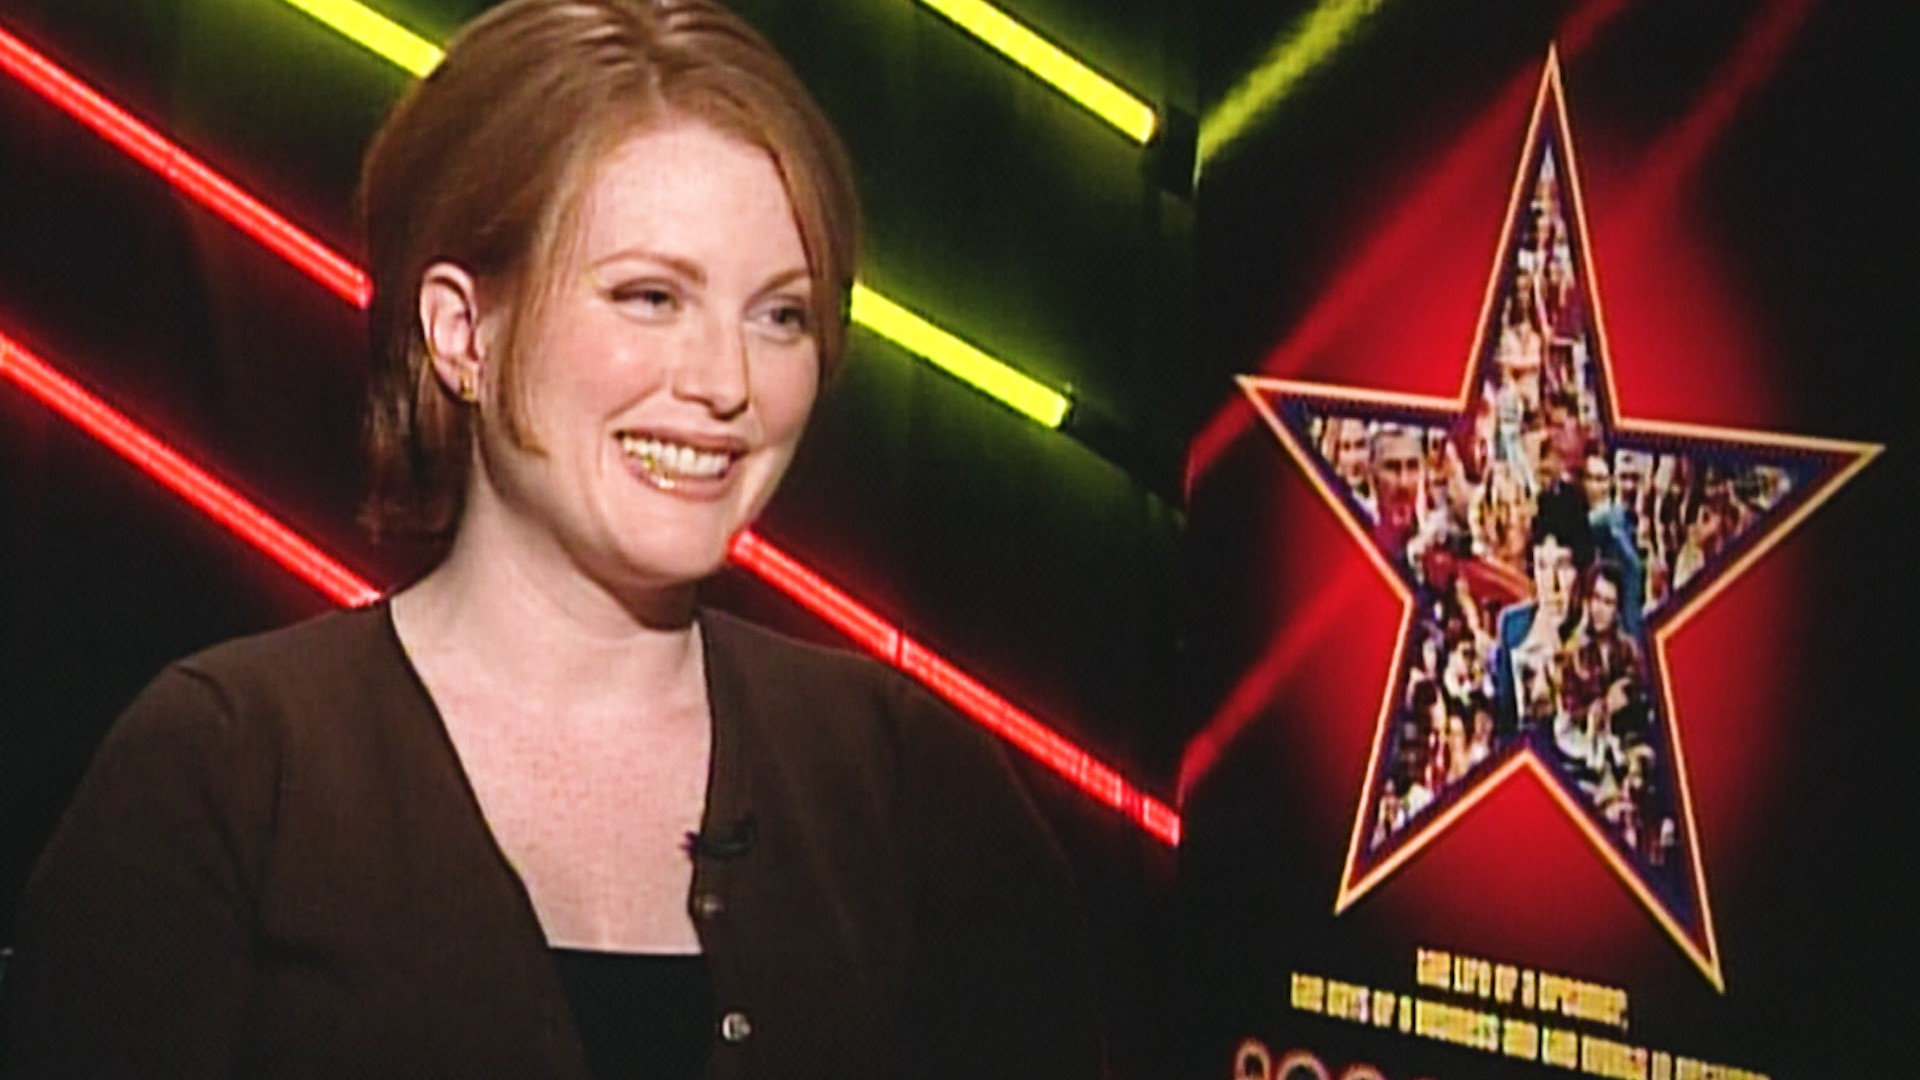 Julianne Moore sat down with WFAA to talk about taking on the role of Amber Waves in the 1997 film Boogie Nights.